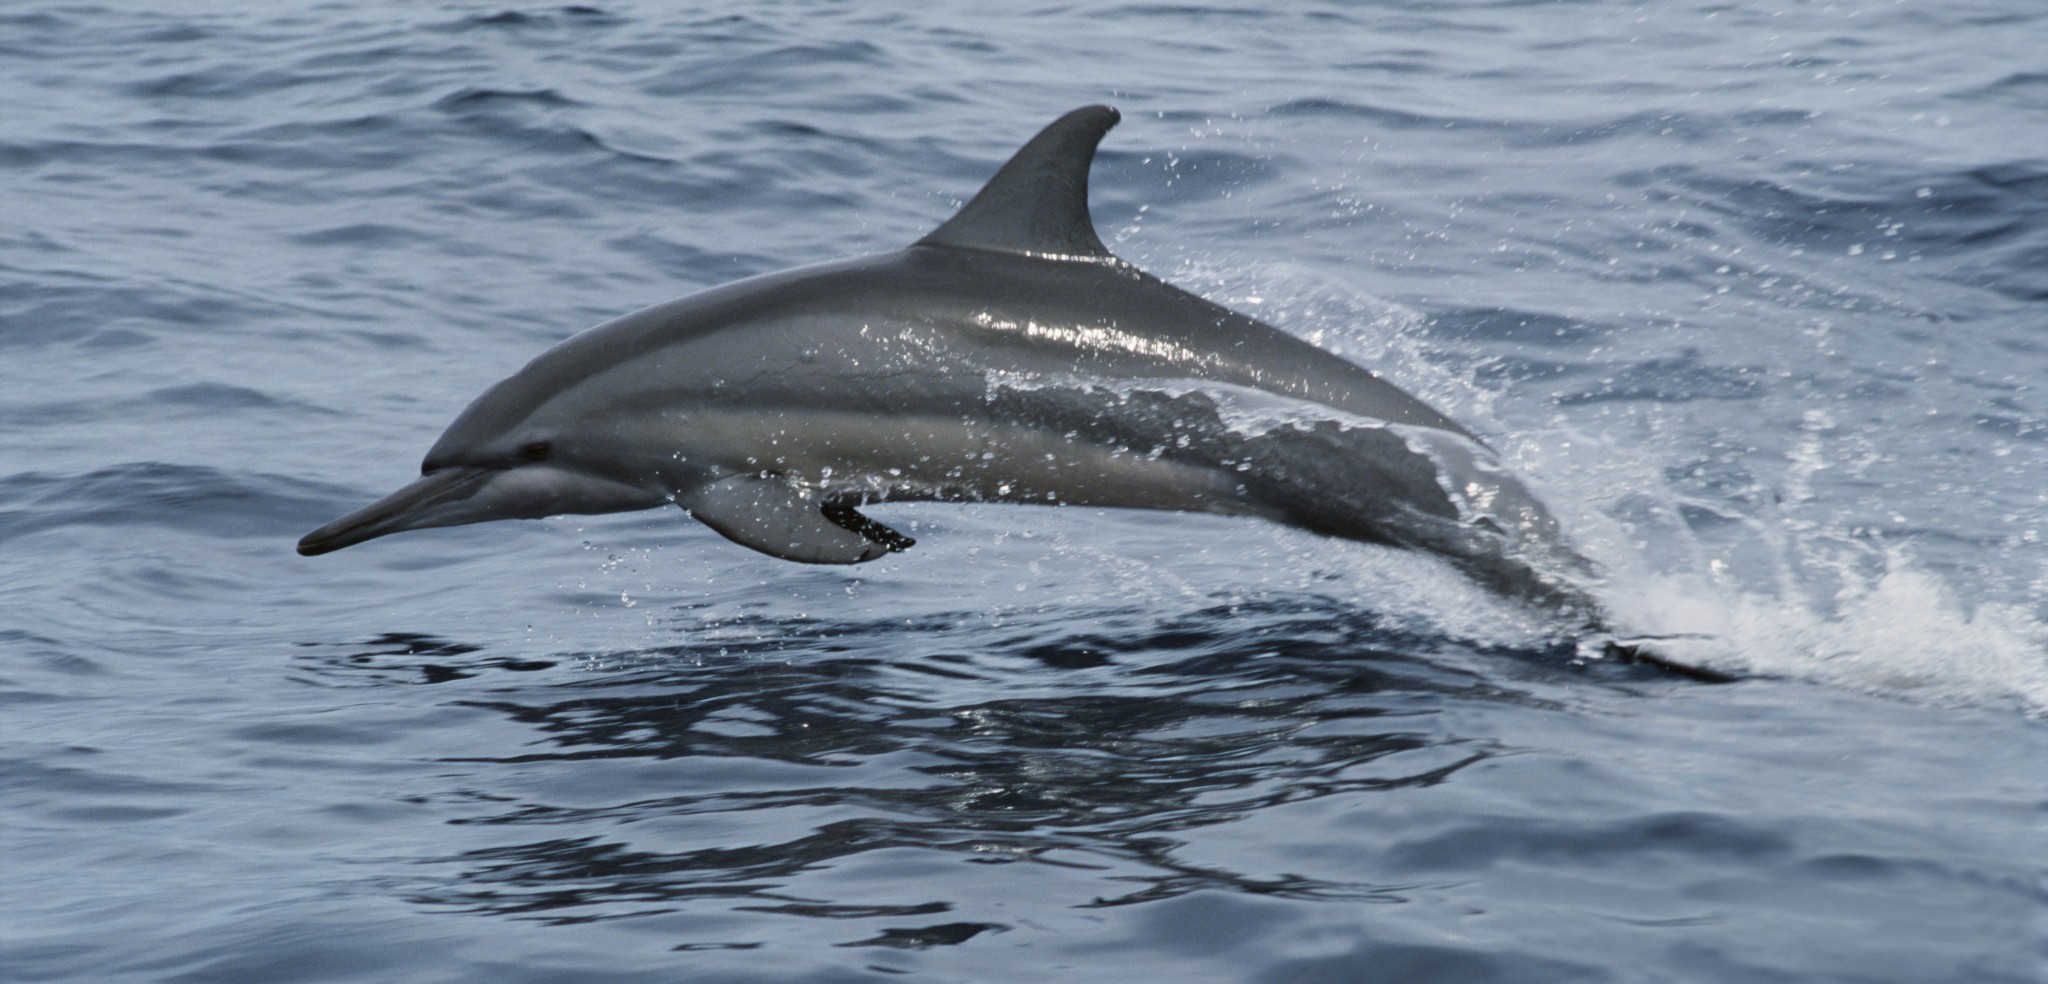 In the Solomon Islands, spinner dolphins are being hunted for their teeth. Photo by Mike Parry/Minden Pictures/Corbis